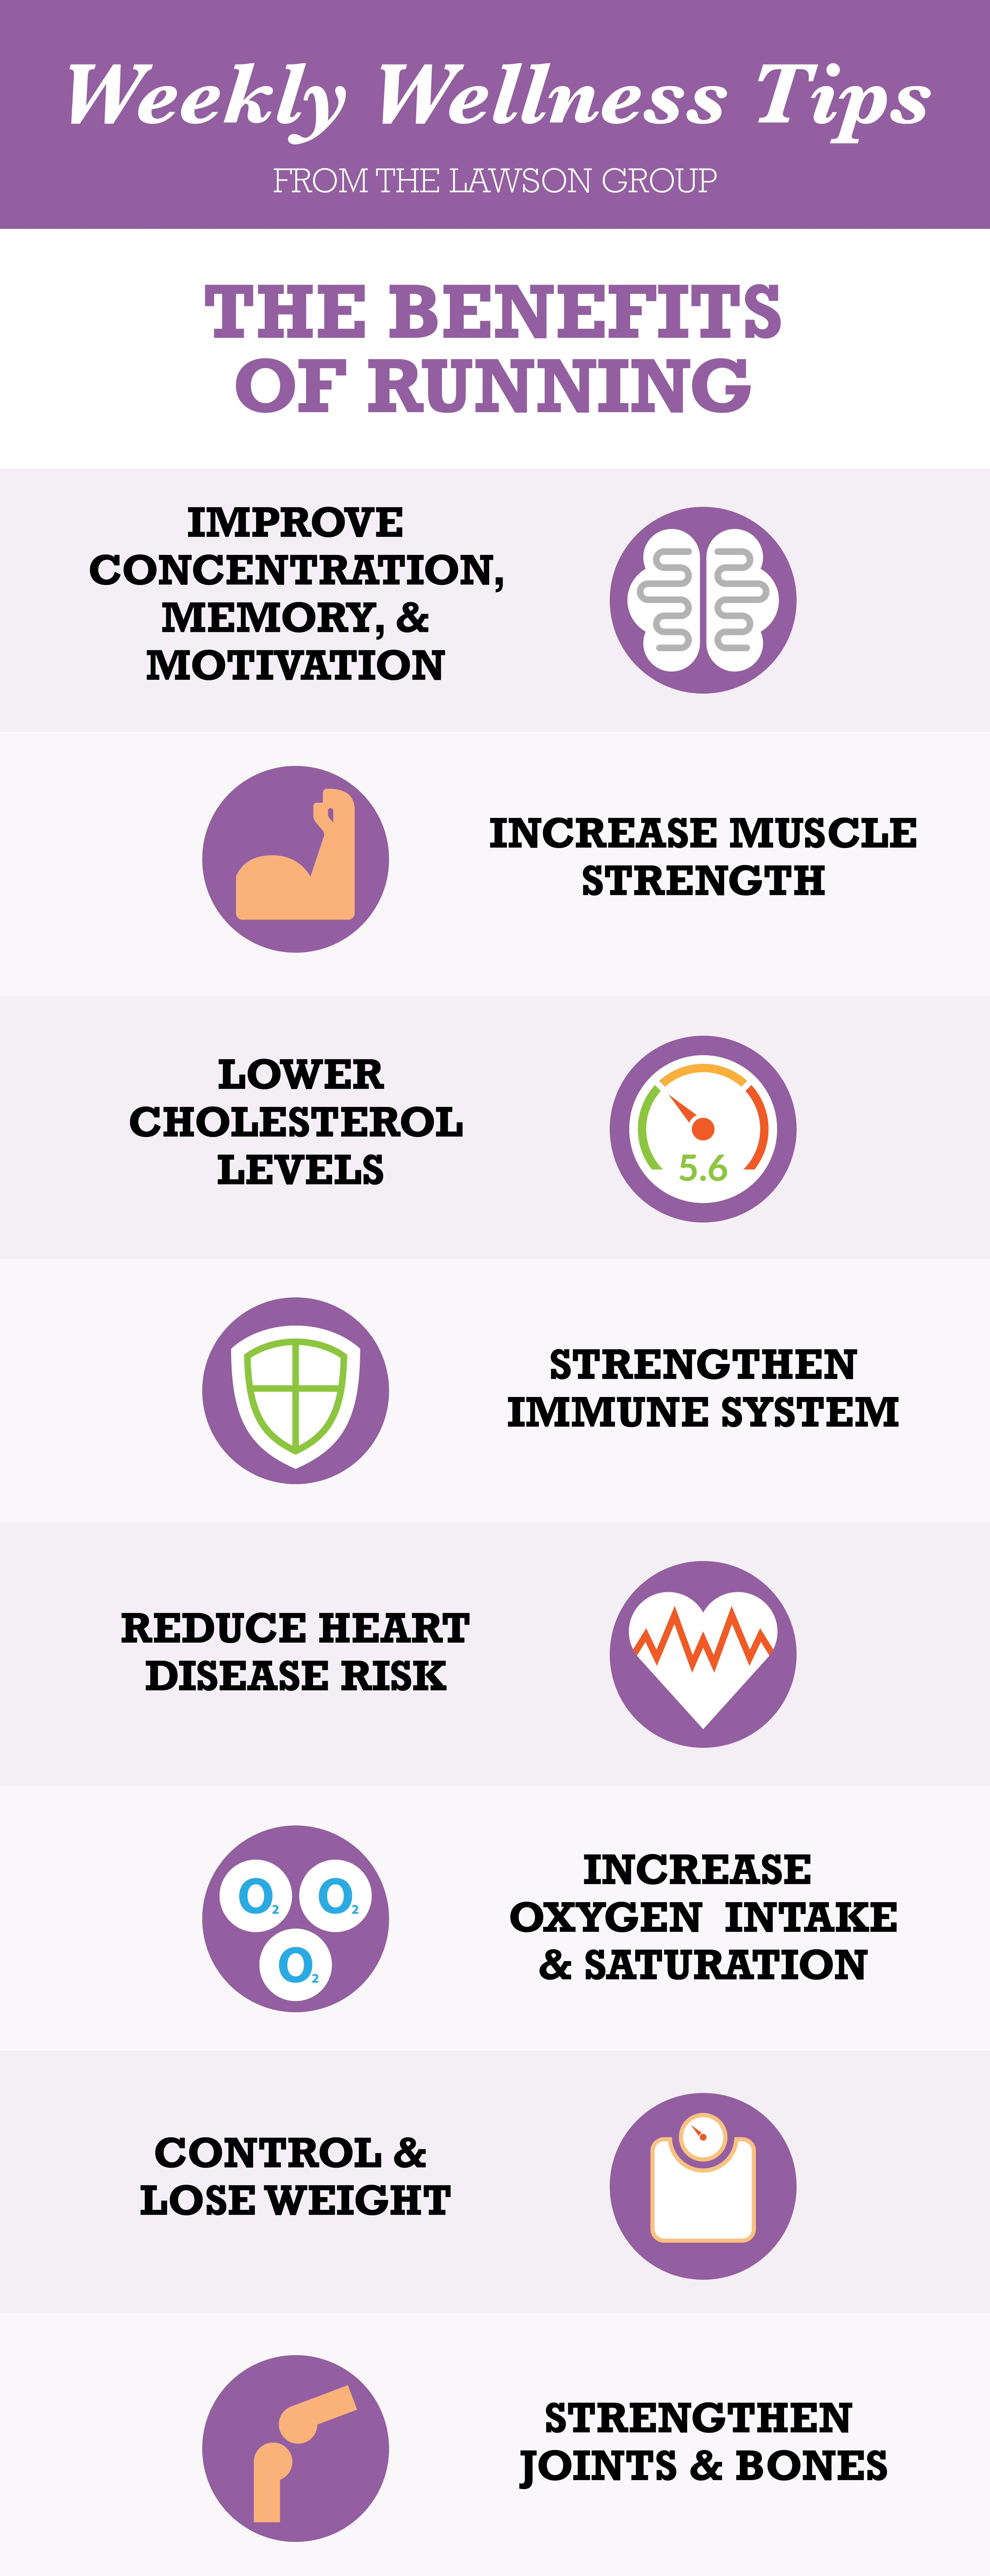 TLG22005 Wellness Tips The Benefits of Running Infographic-1080px-01